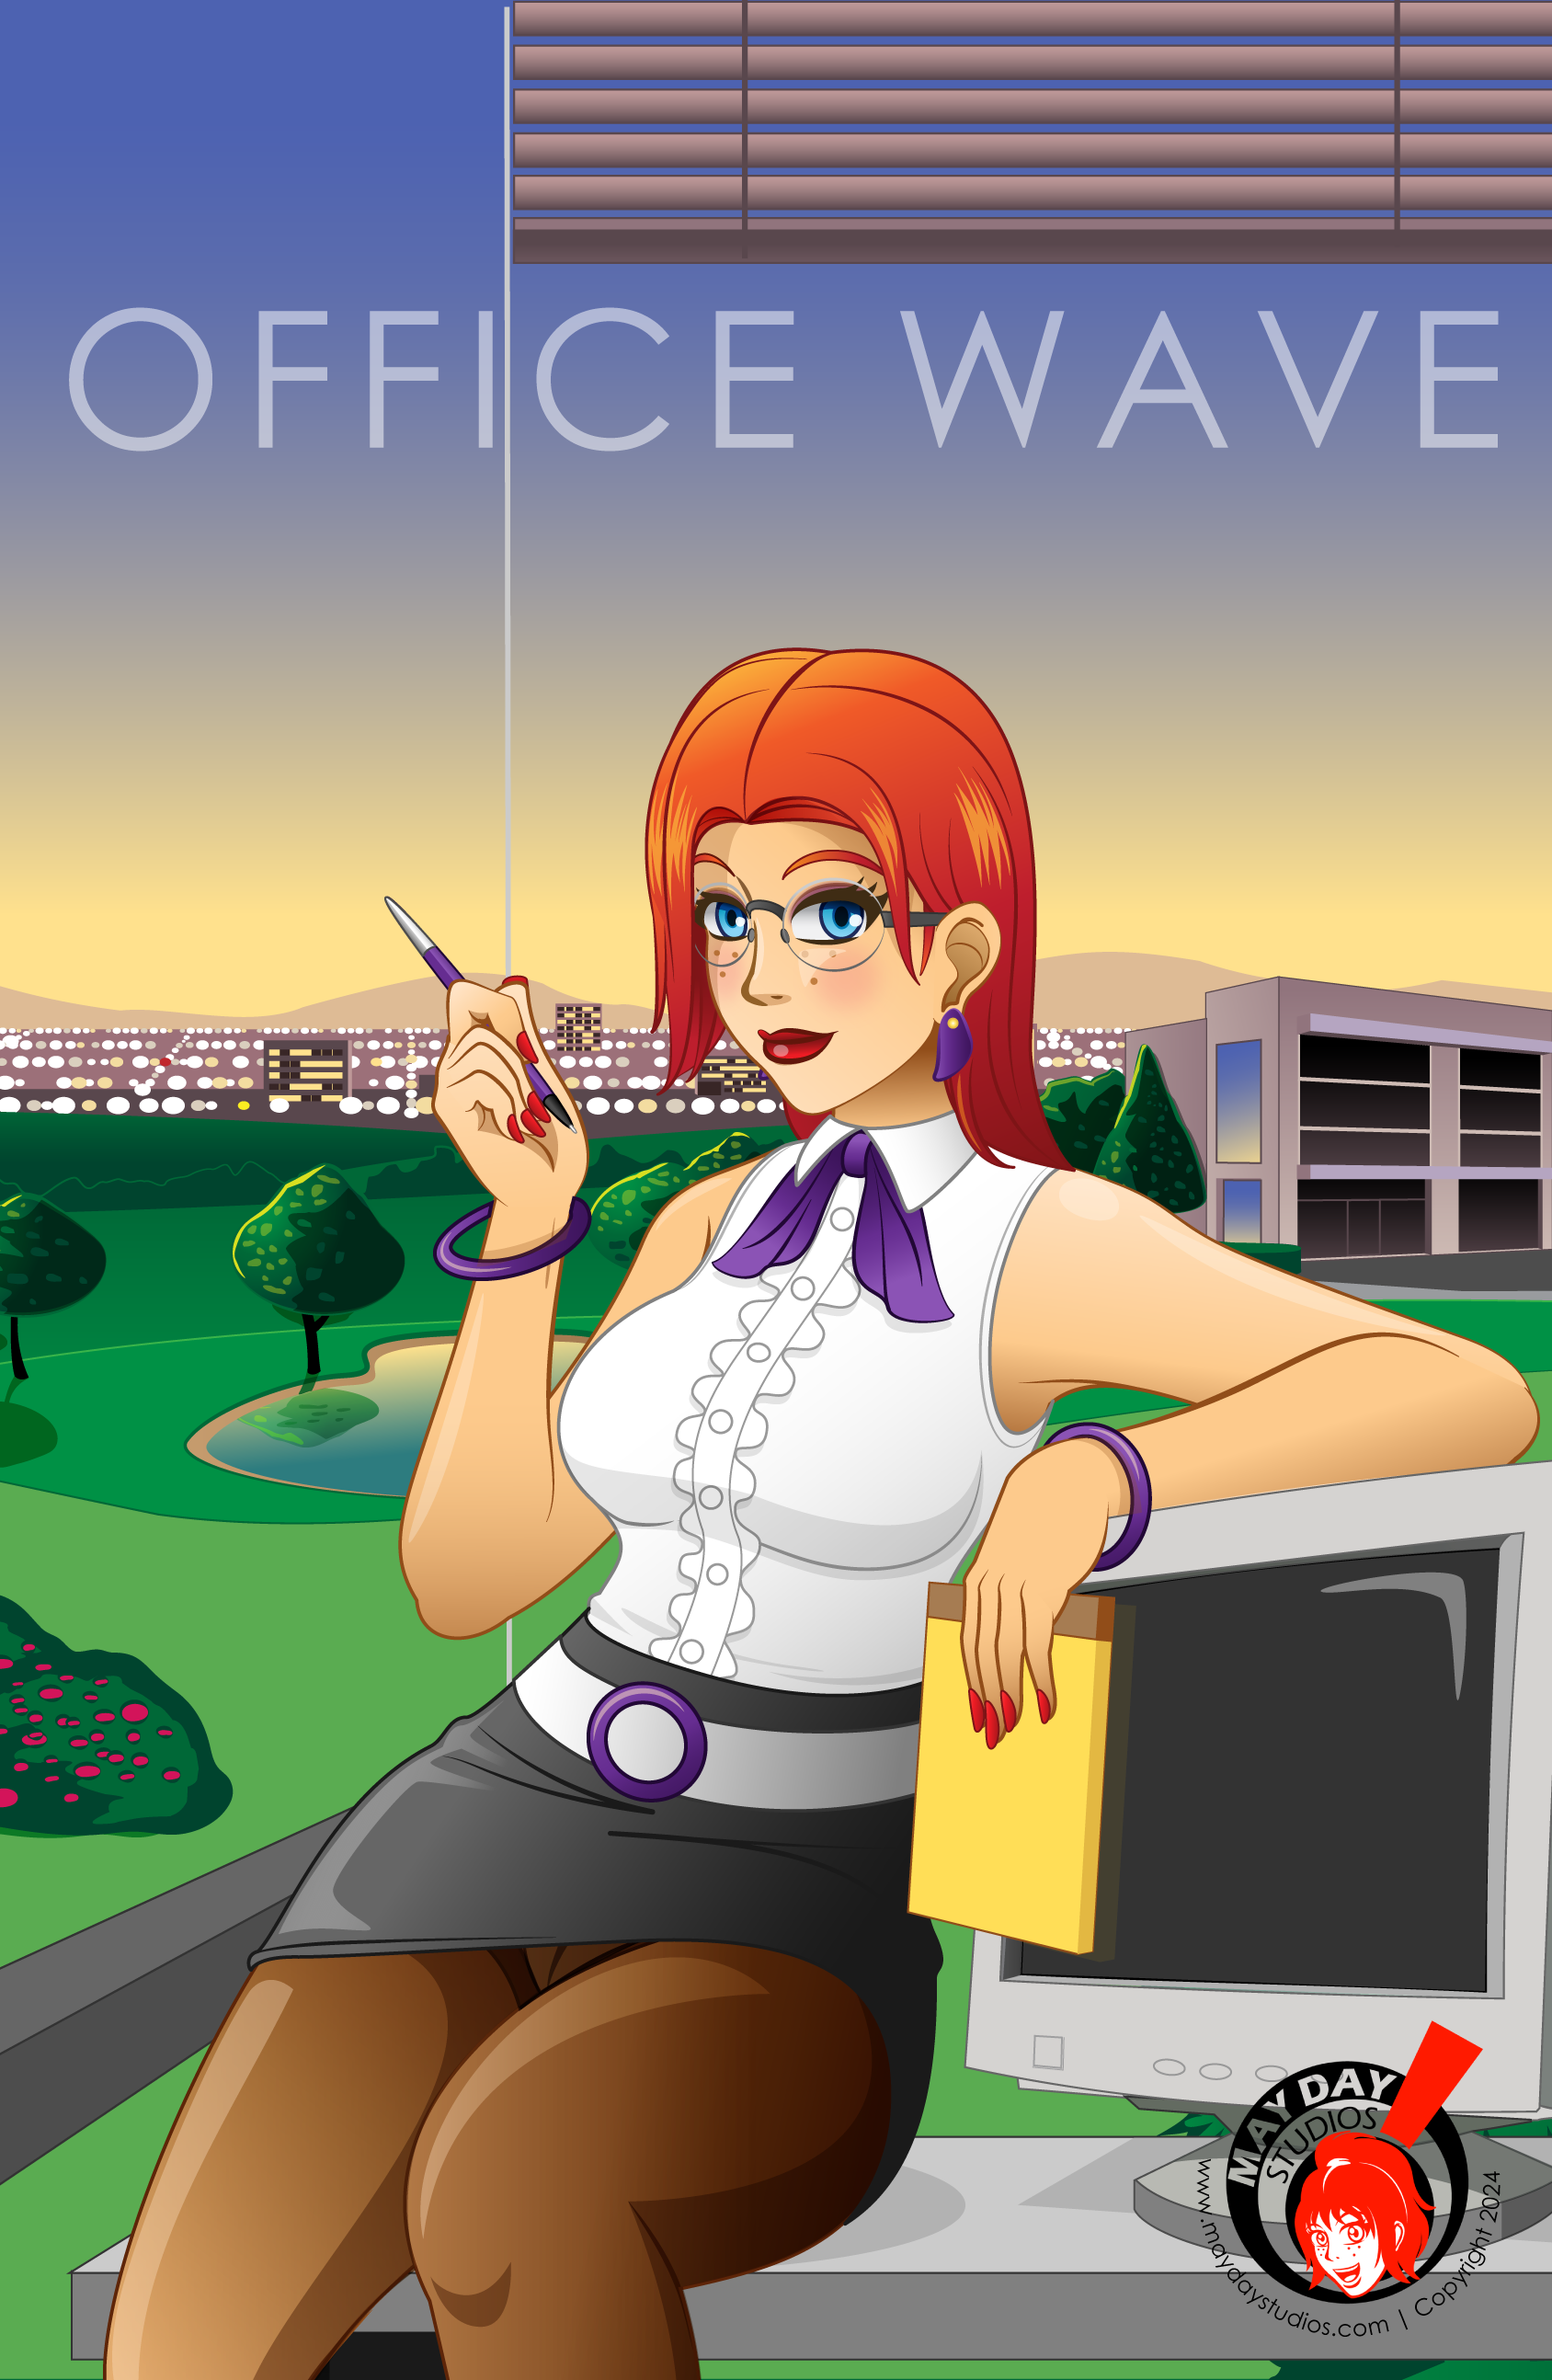 office wave poster